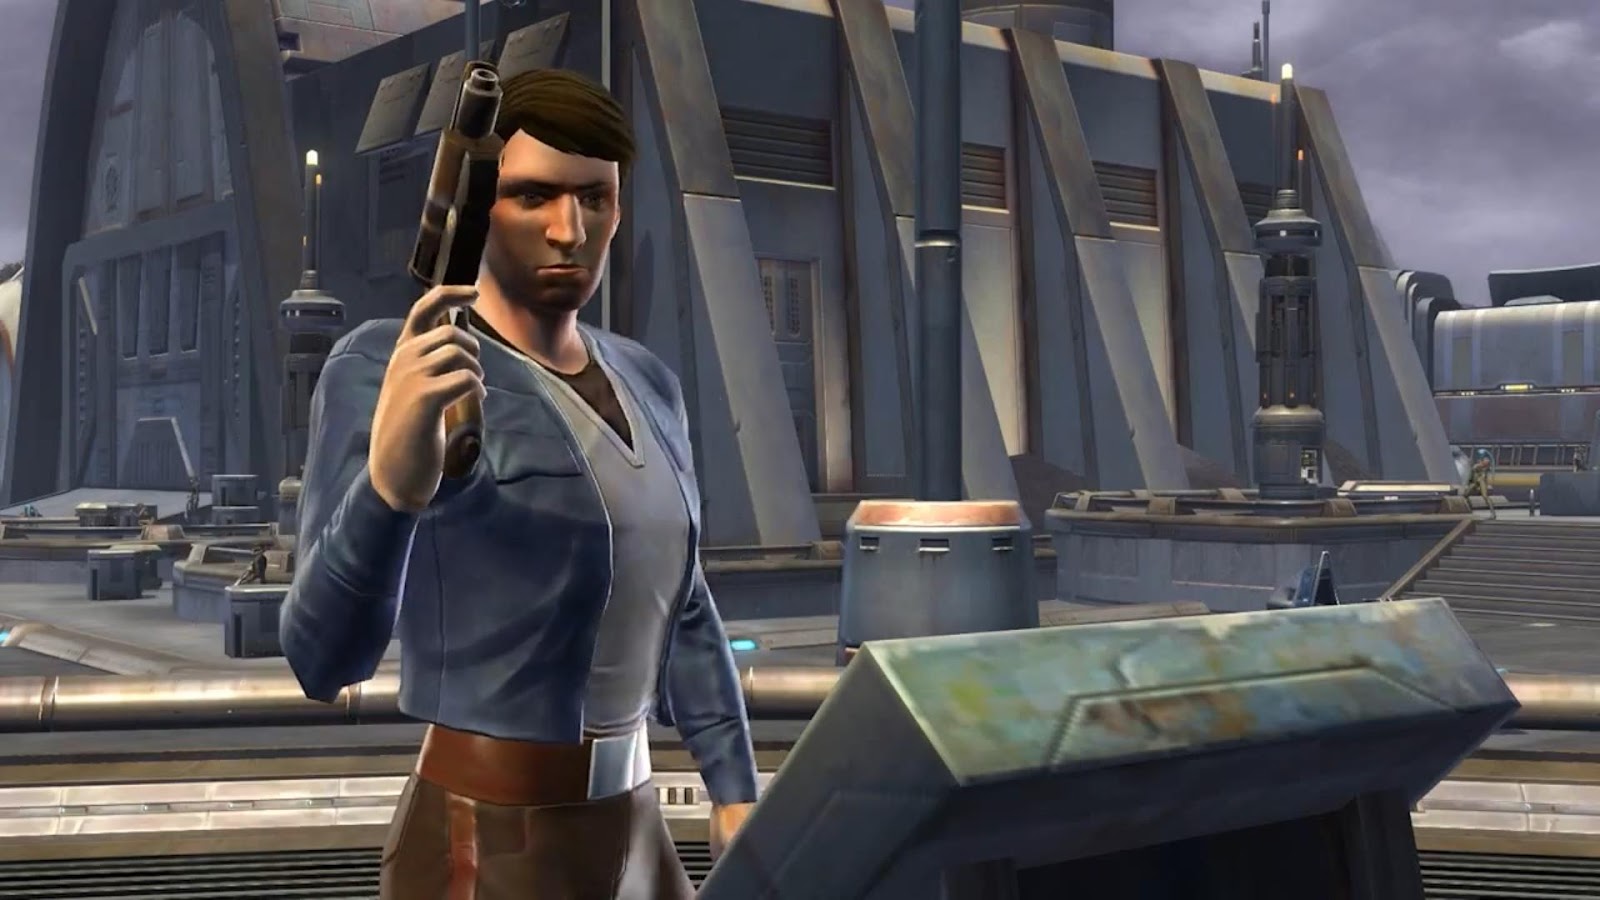 Opens with a very Han Solo-esque Smuggler in a Han-ish outfit - blue jacket...